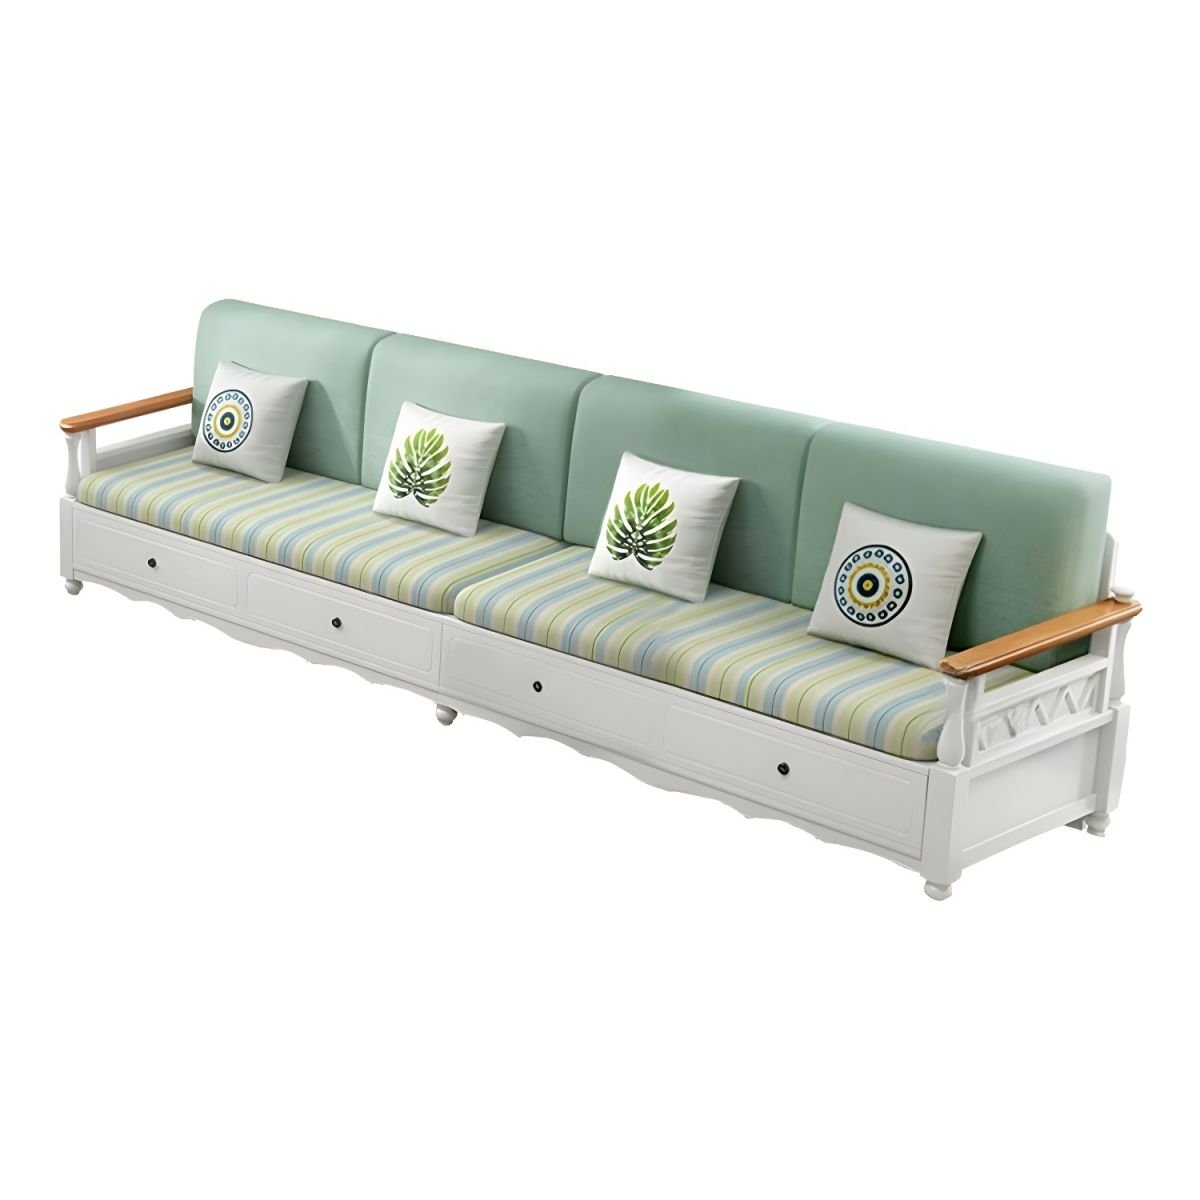 Rustic Green Farmhouse Sectional Sofa with Under-Seat Storage for Shallow Width Comfort - 114"L x 31"W x 35"H Cotton and Linen